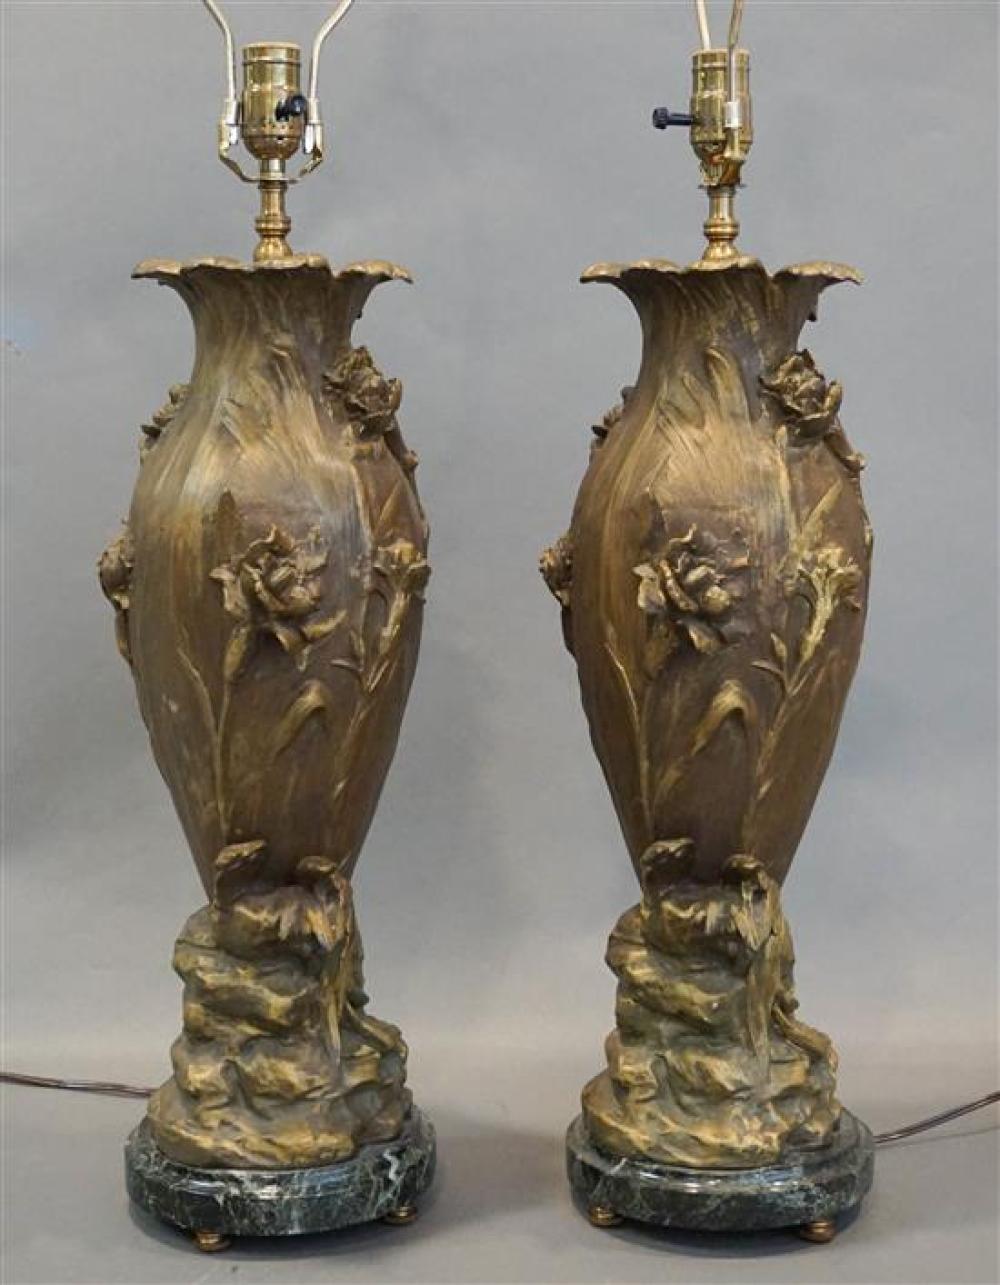 PAIR OF ART NOUVEAU STYLE PATINATED 31f7cb